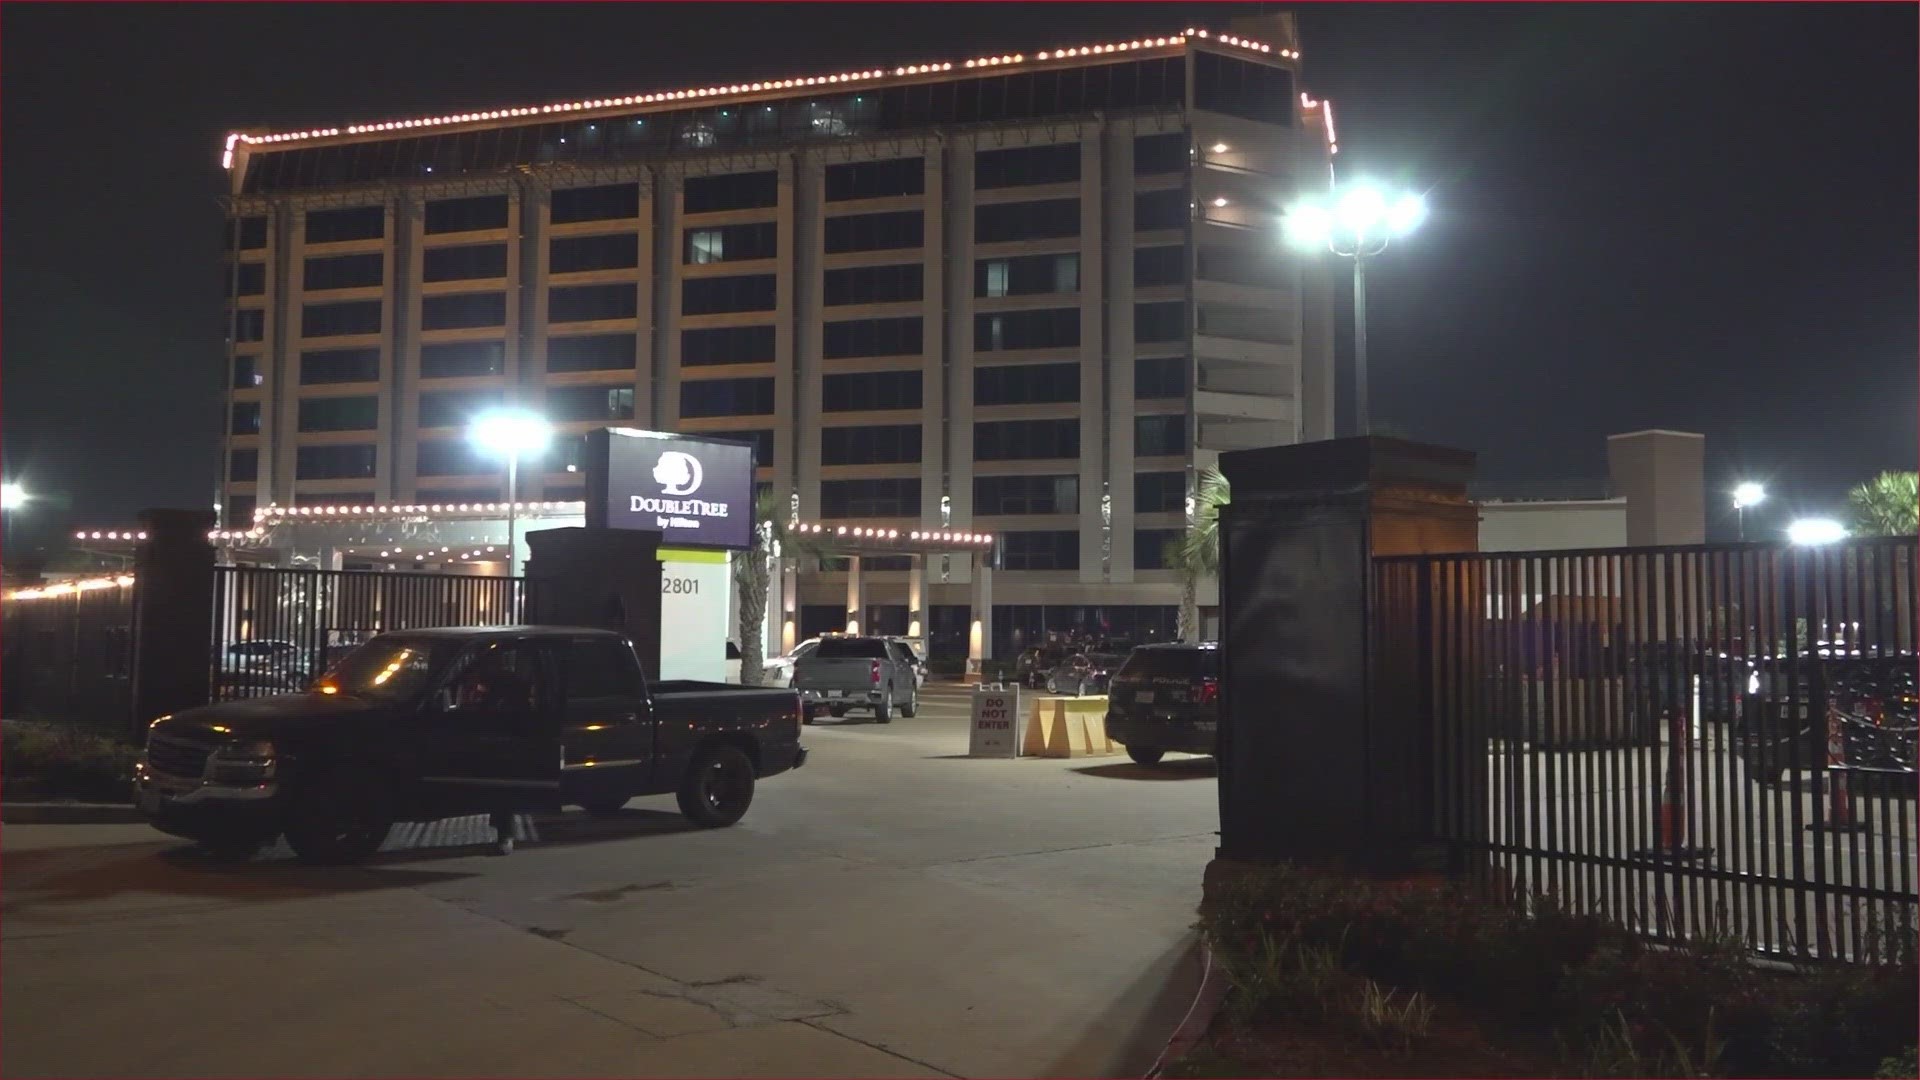 Houston police say an 8-year-old girl was found dead in a hotel pool late Saturday night near the Northwest Freeway.